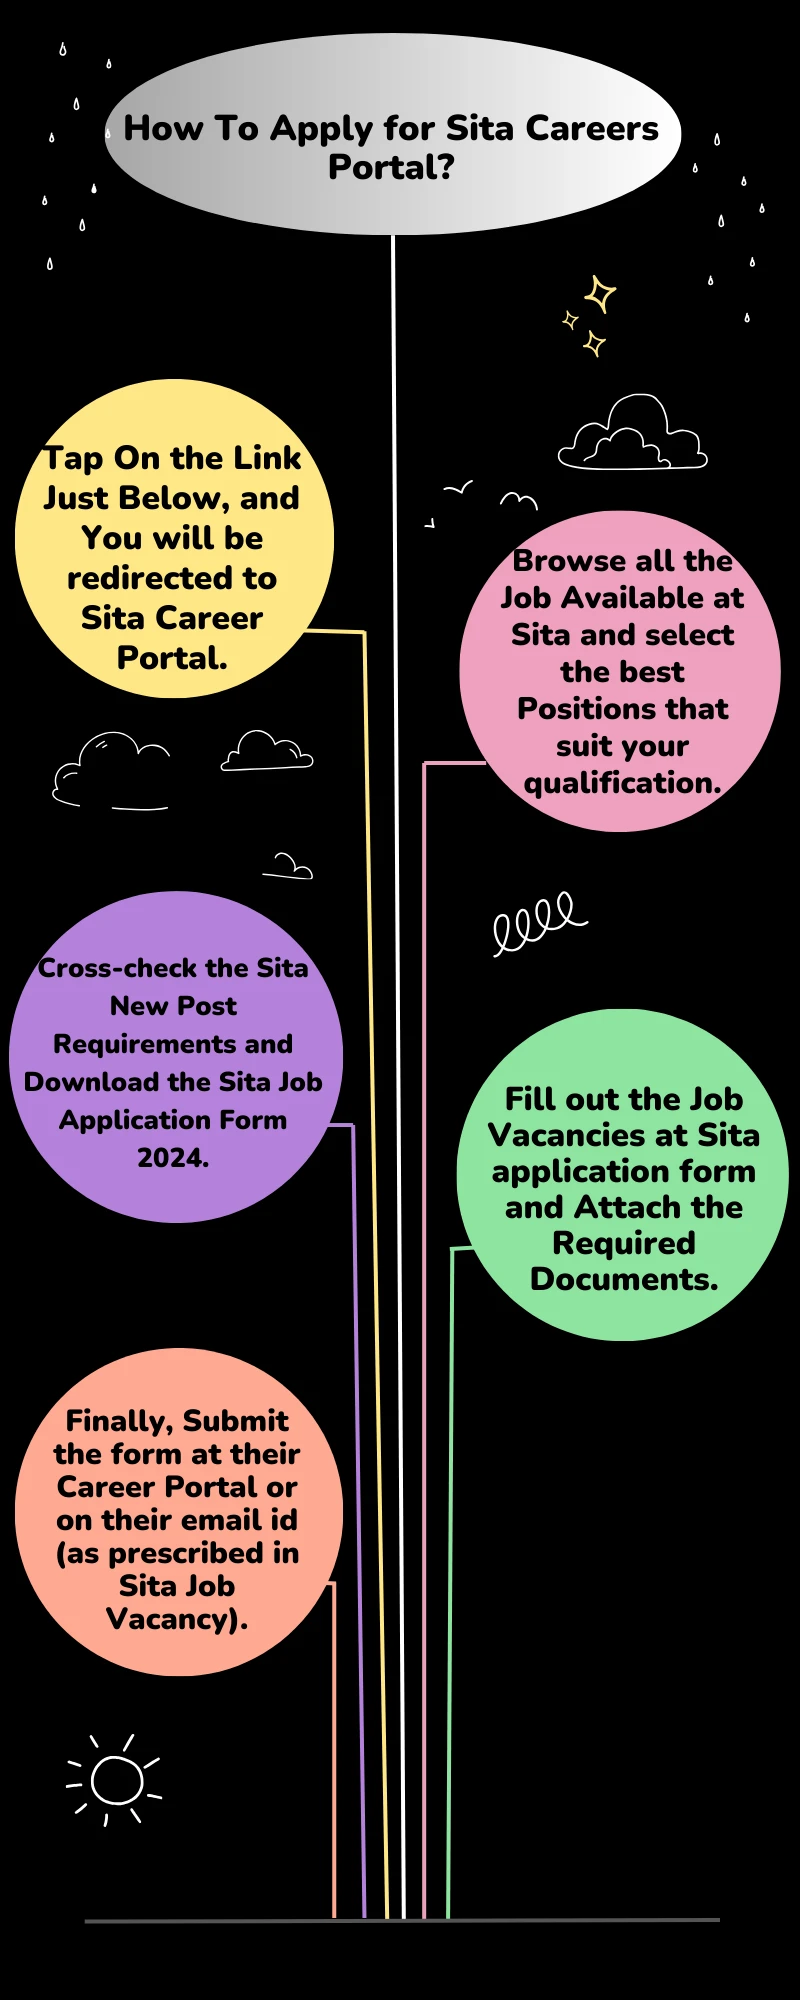 How To Apply for Sita Careers Portal?